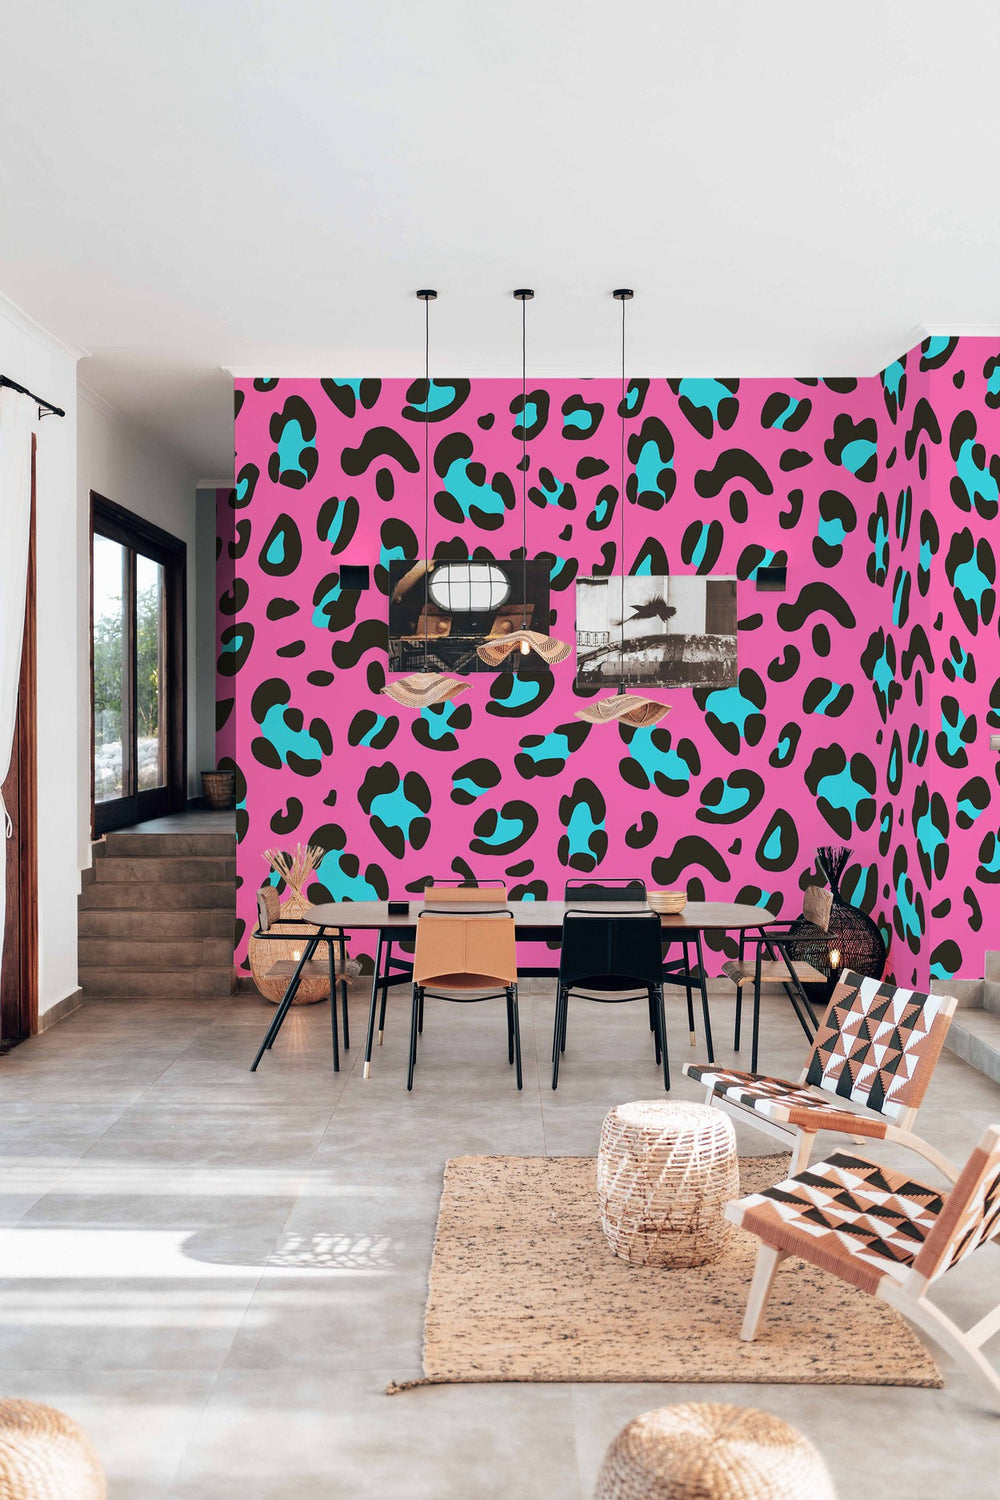 Dining room interior featuring a vibrant pink wall with large leopard print mural design, modern furniture, and decorative plants.